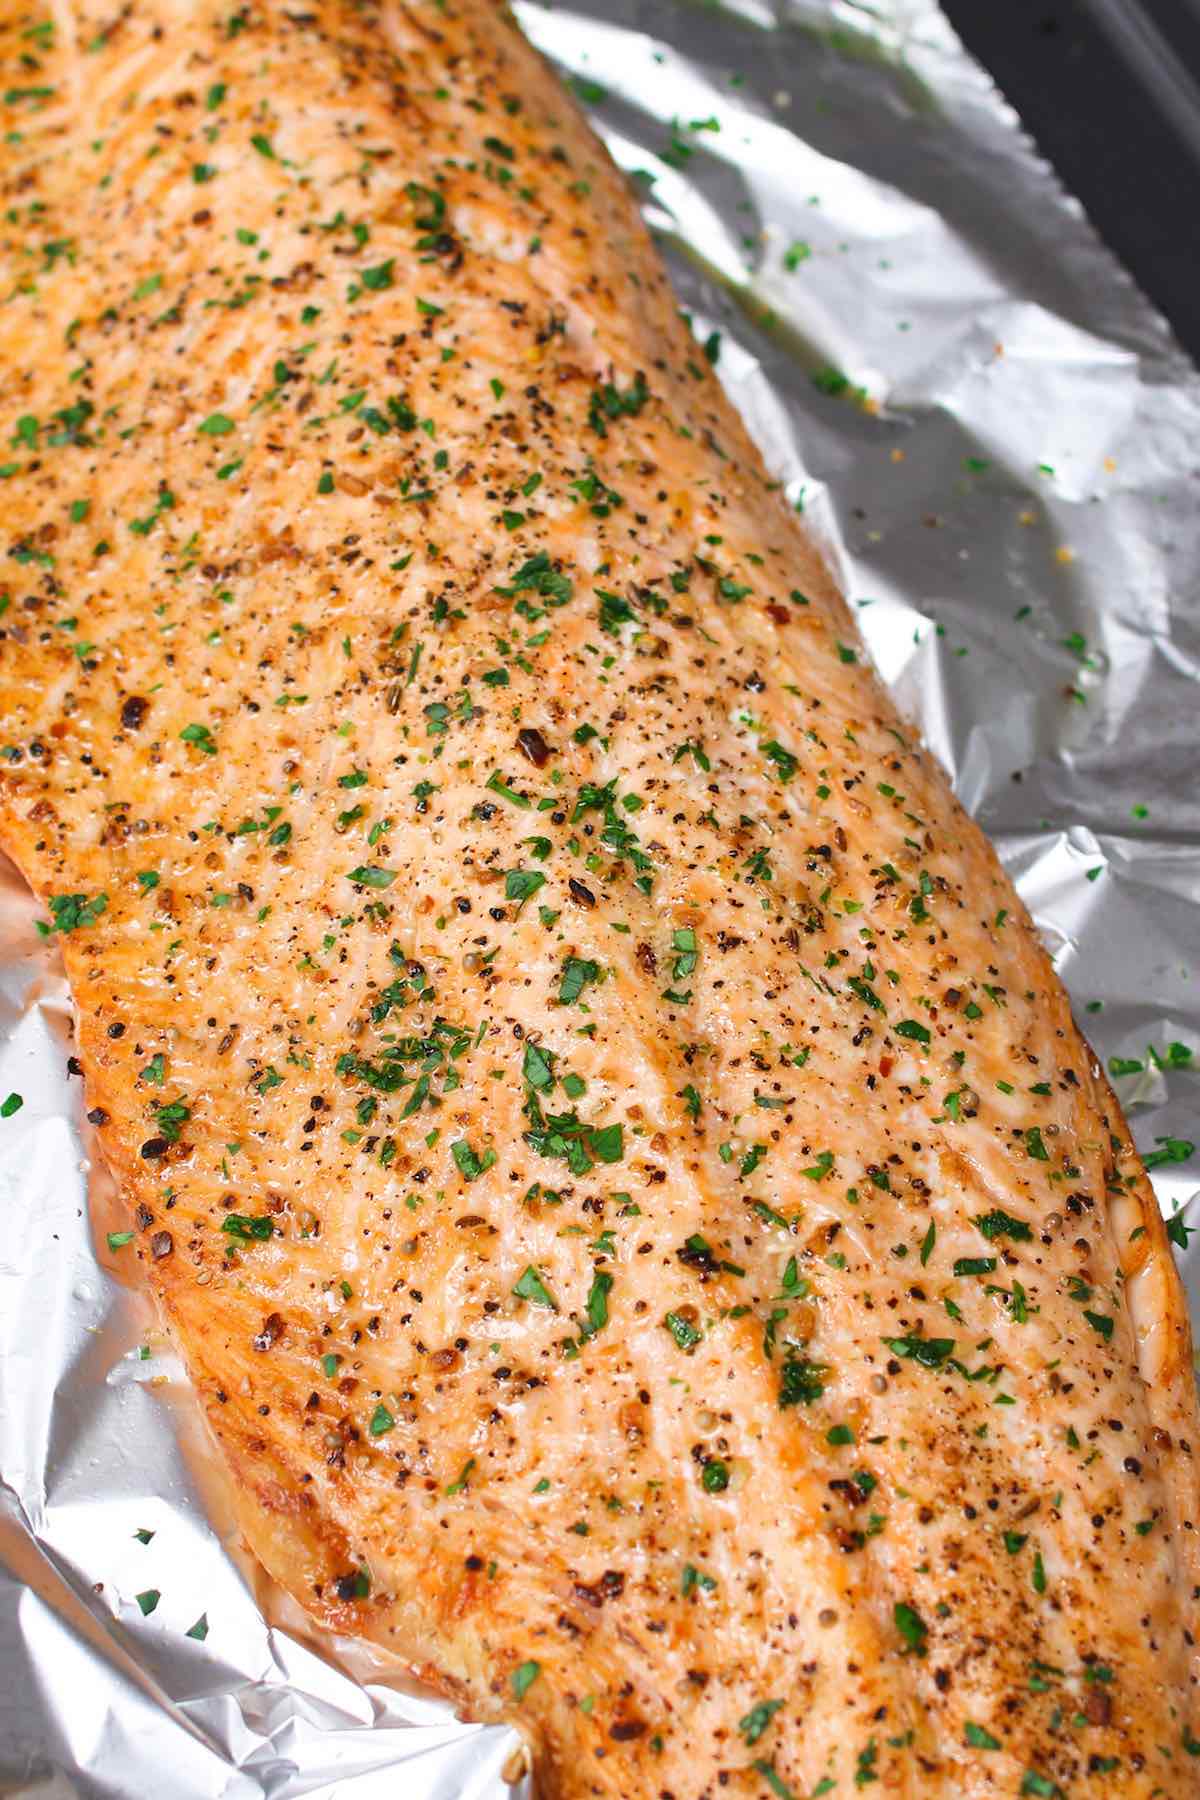 Master The Art Of Baking Salmon: A Comprehensive Guide On How To Perfectly Cook This Delicious Fish